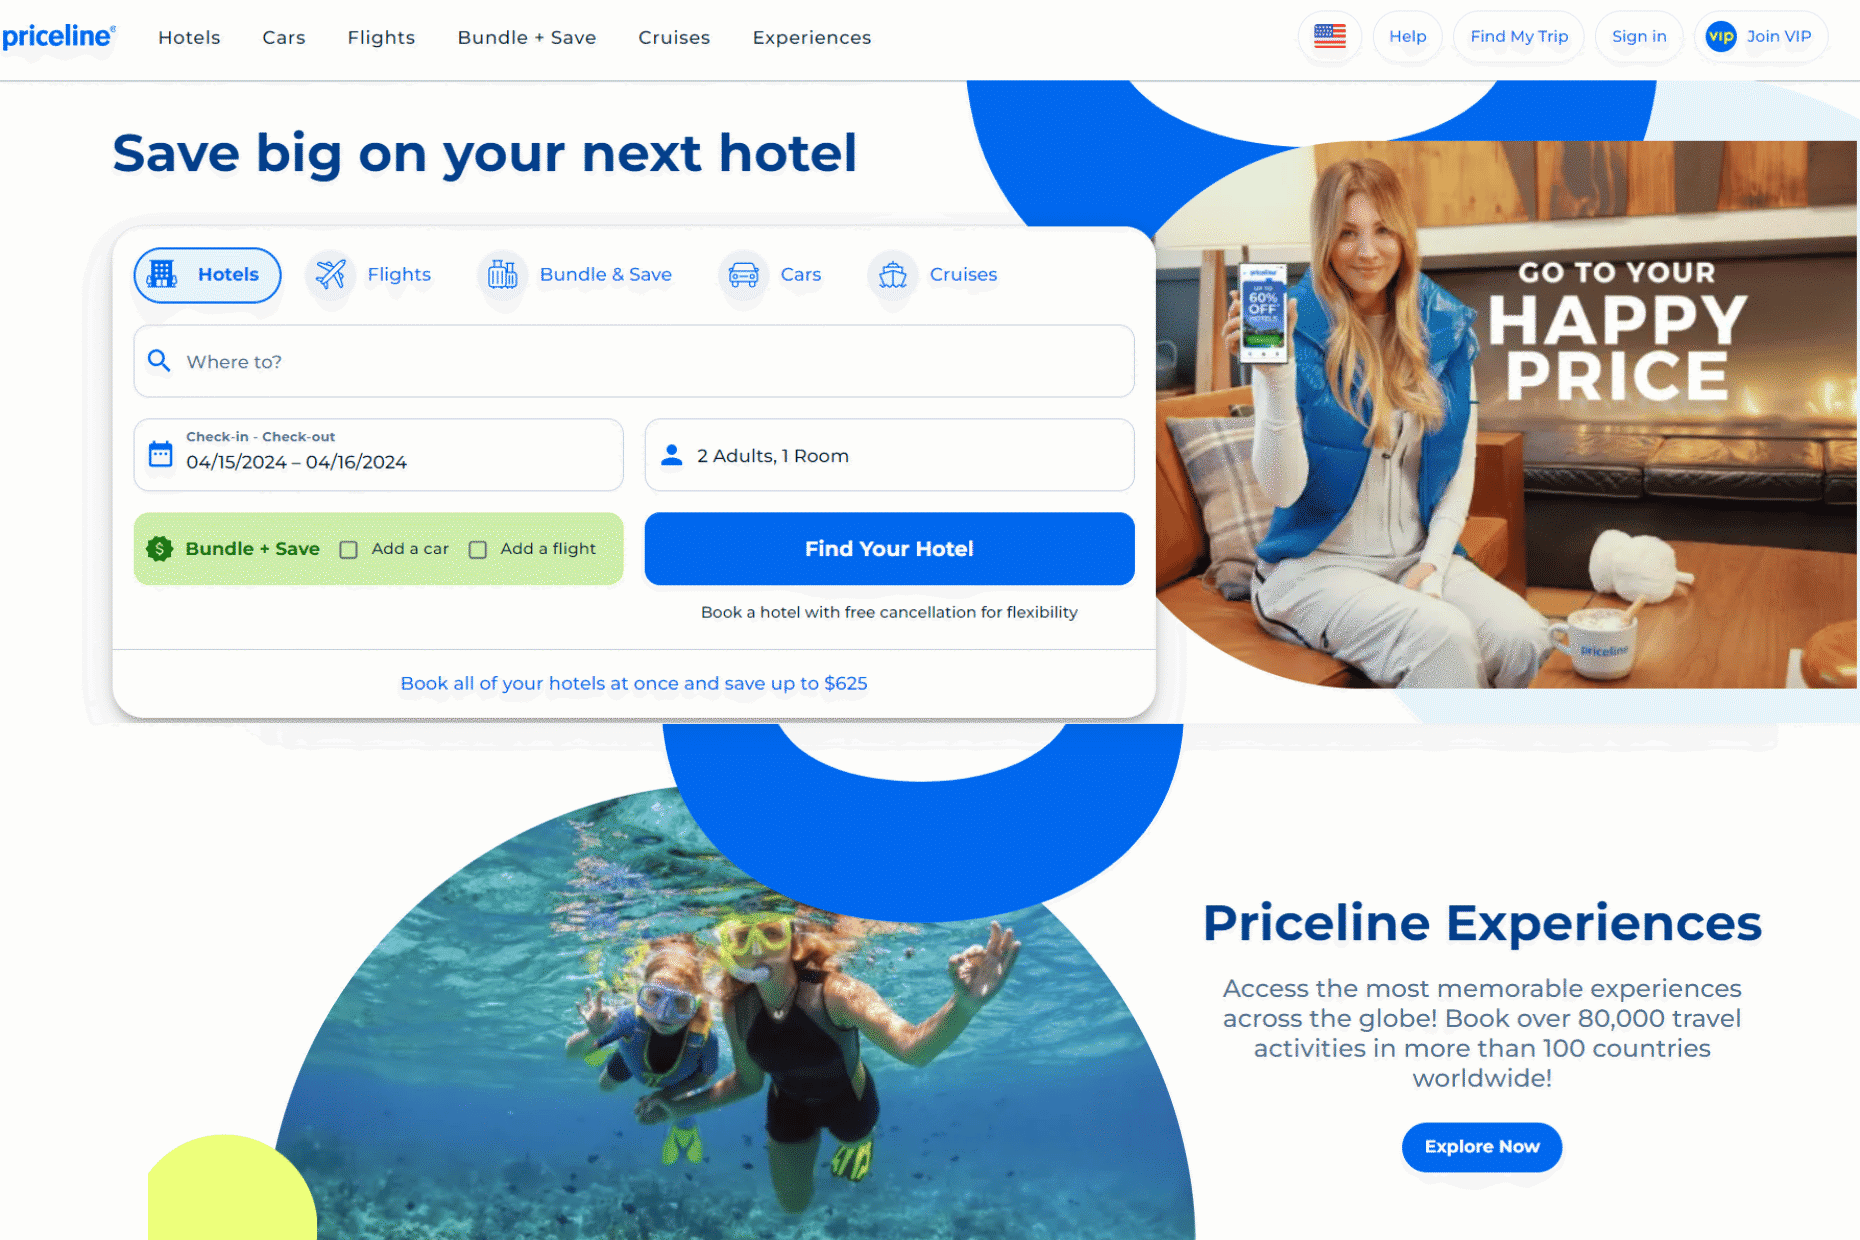 <p><a href="https://press.priceline.com/our-story">Priceline</a> is another long-established discount travel website. Tech-savvy travellers first started using it to book flights in 1997. Priceline <a href="https://www.nerdwallet.com/article/travel/is-priceline-legit">acts as an intermediary</a> between you and the hotel or airline you need to book. Once you’ve found a suitable flight or hotel with the search tool, book on Priceline and manage your booking via the hotel or airline. Priceline has a loyalty program and a price-matching guarantee, and lets you “bundle” airline, hotel, rental car and cruise bookings. Travellers should note that cancellation policies vary and most package deals are non-refundable. </p>